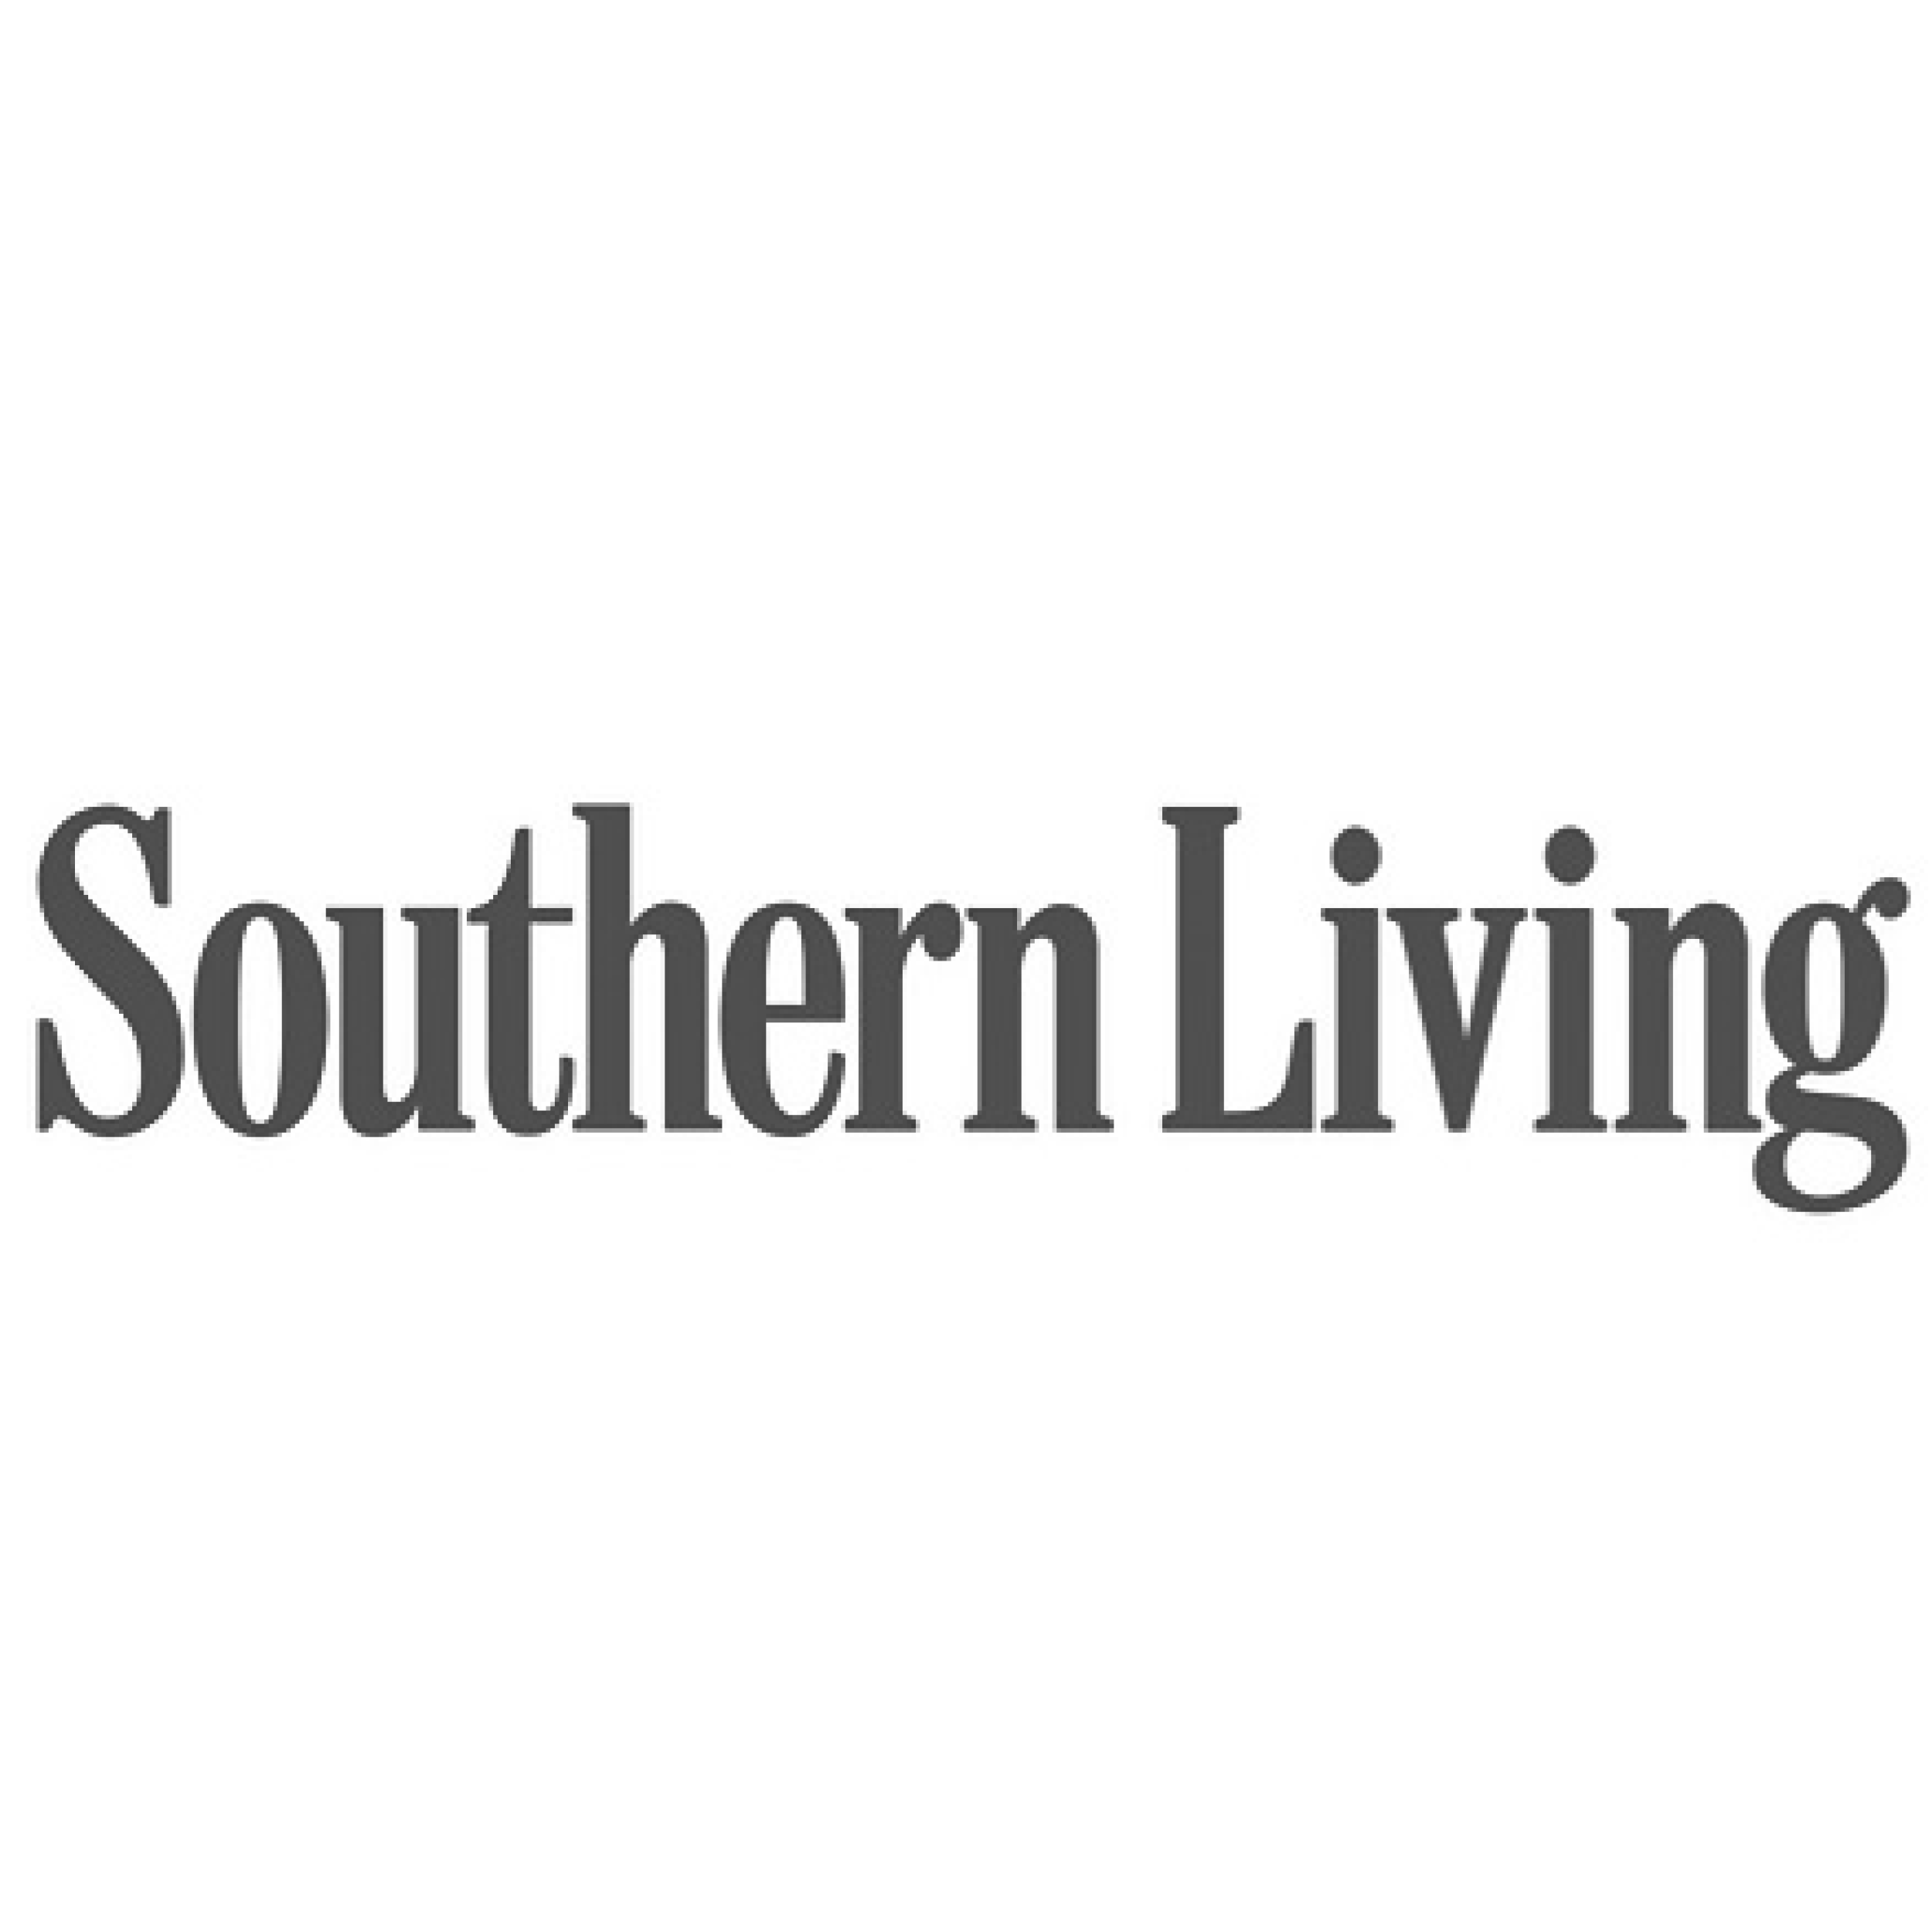 Souther Living Logo - Designs By Andrea